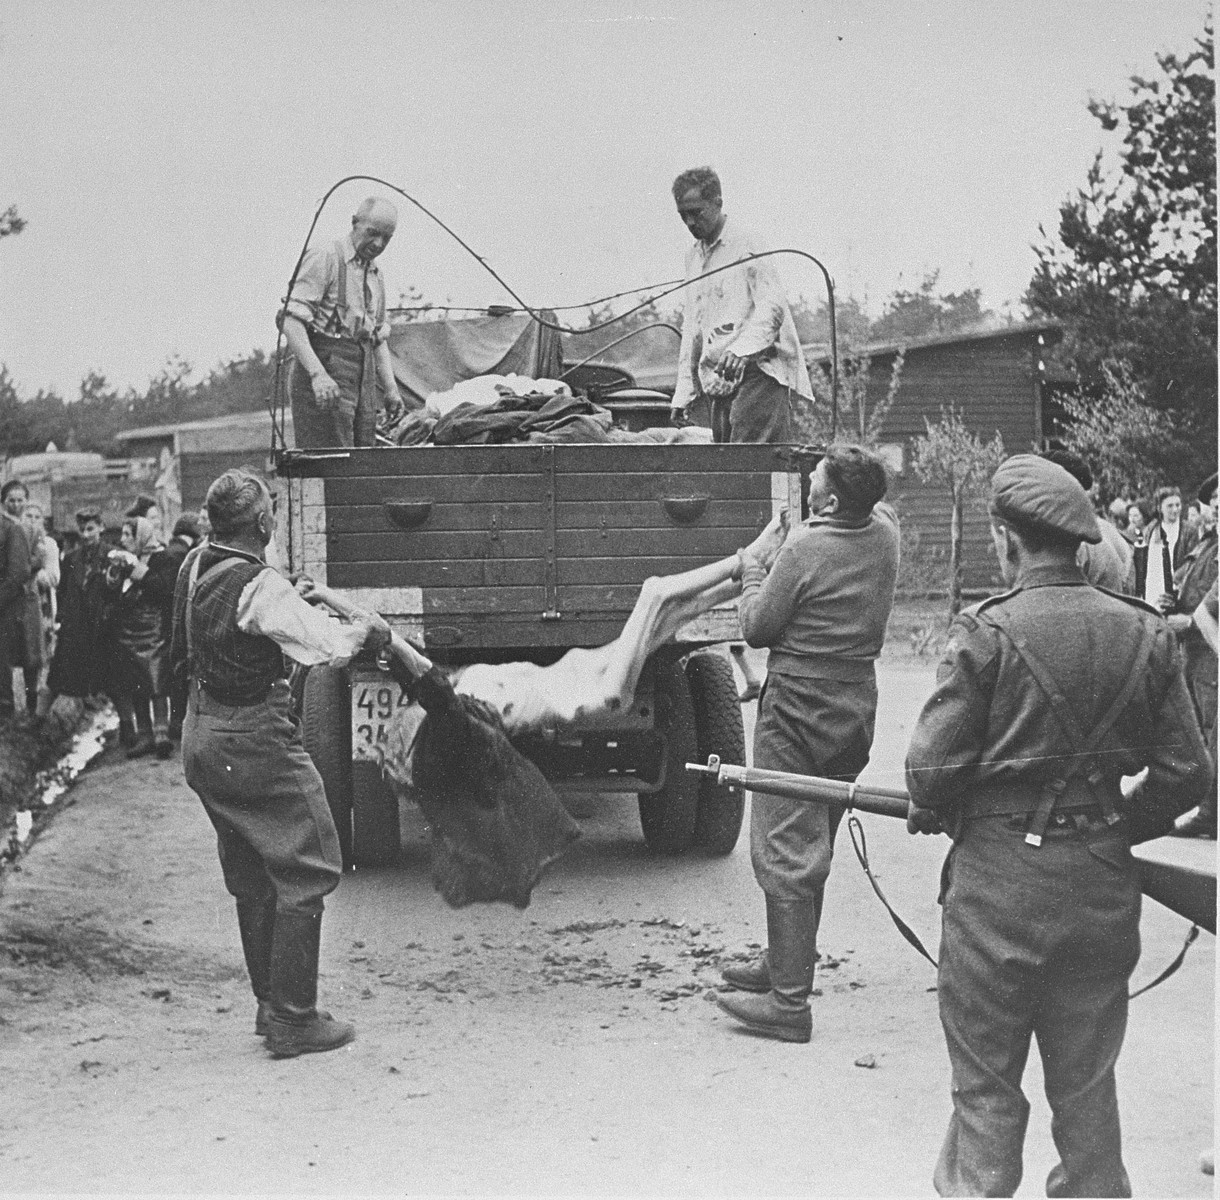 SS guards are forced to load corpses onto a truck while under the supervision of British soldiers.

Original caption reads:  "S.S. men captured at the camp, are made to load lorries with bodies to be taken away for burial."